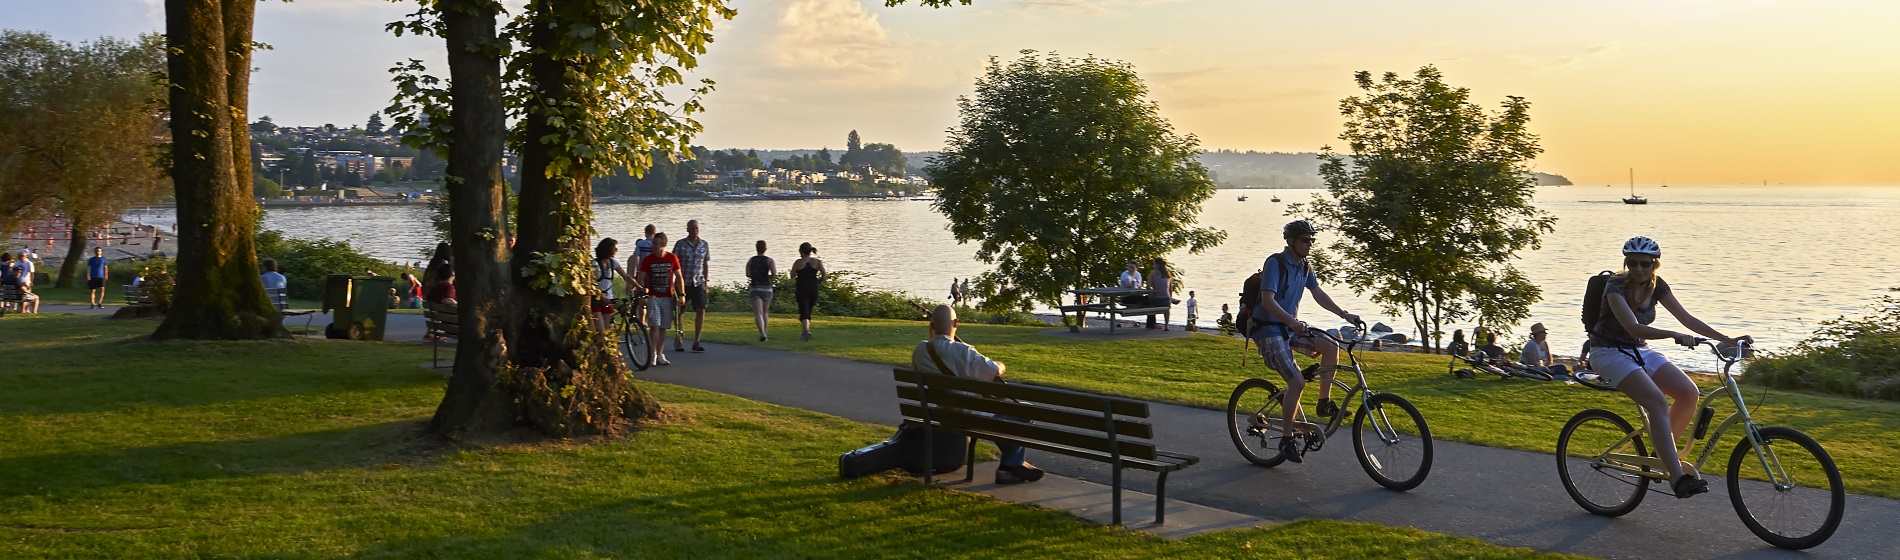 park by a lake with people walking, biking and sitting on benches